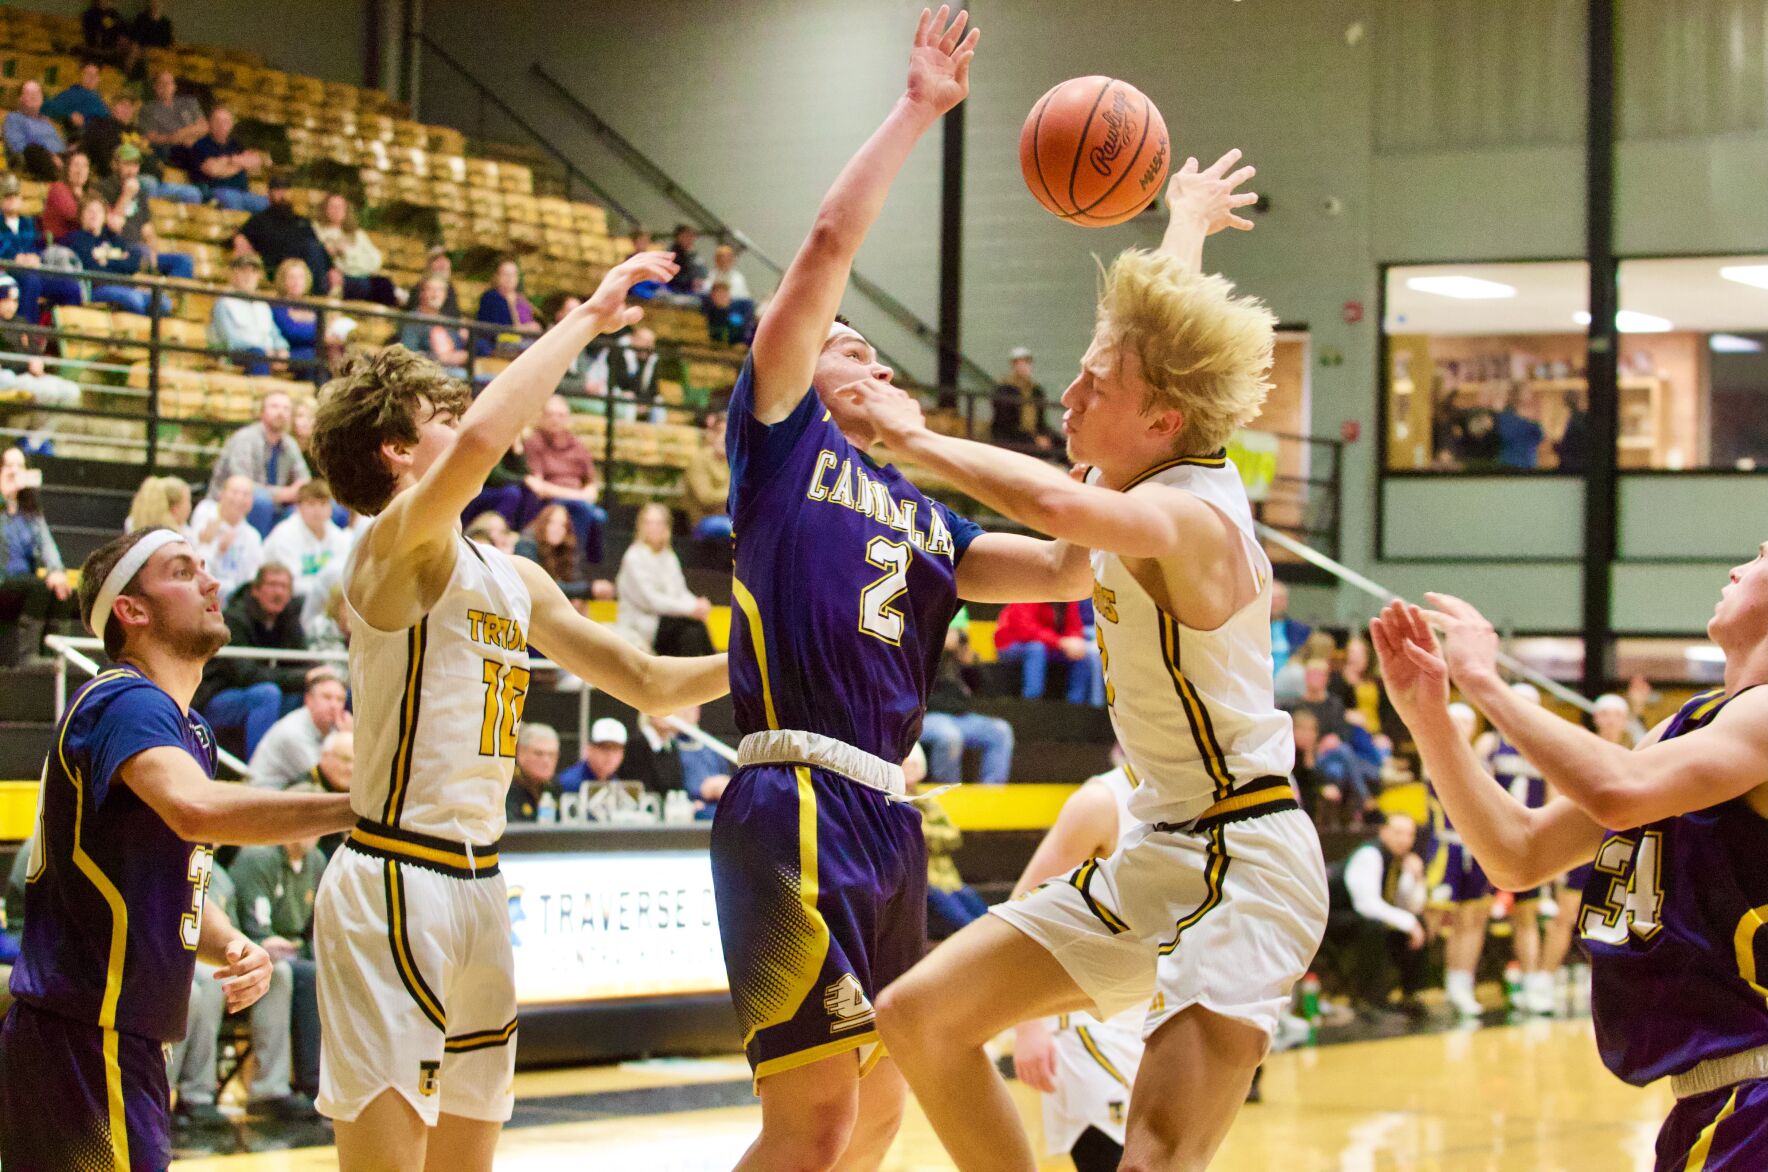 Cadillac dominates Traverse City Central with a 68-33 victory; Charlie Howell scores 25 points